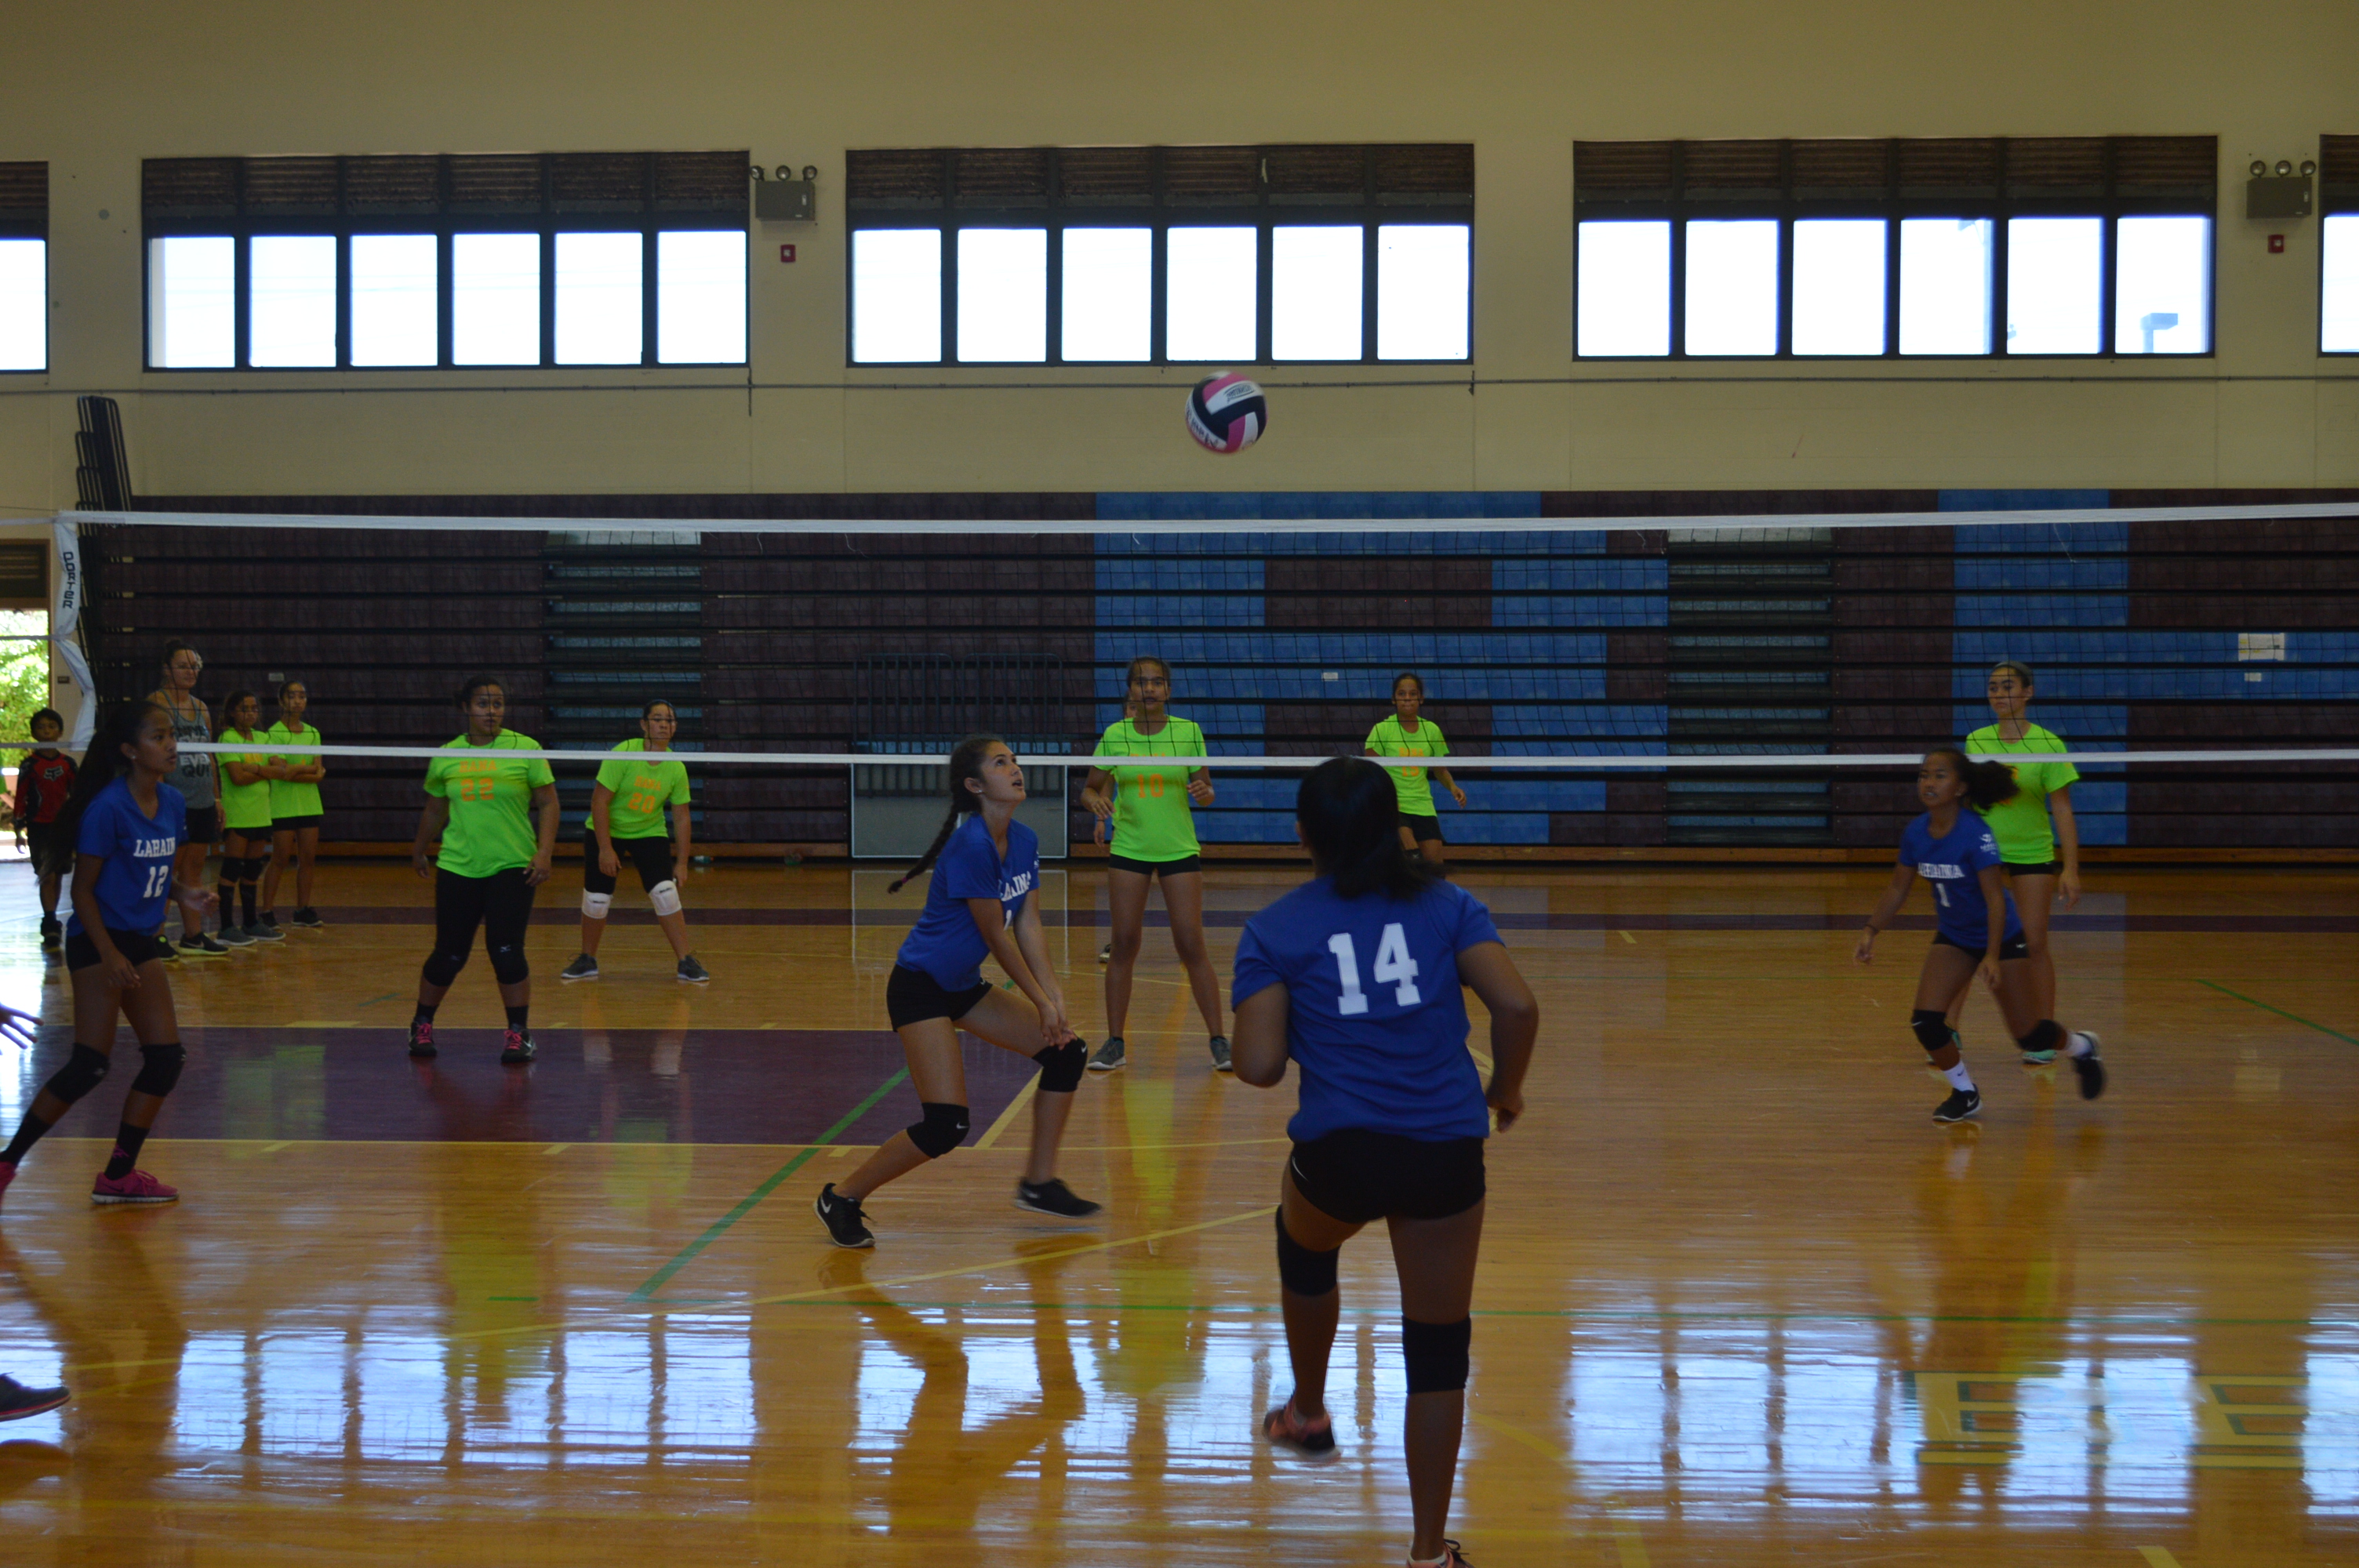 Phase 2 of the State of Hawaii's Resources for Enrichment, Athletics, Culture and Health(R.E.A.C.H.) Maui Middle School Athletics Pilot Initiative kicked-off Saturday with boys and girls volleyball at the Baldwin High School gym.